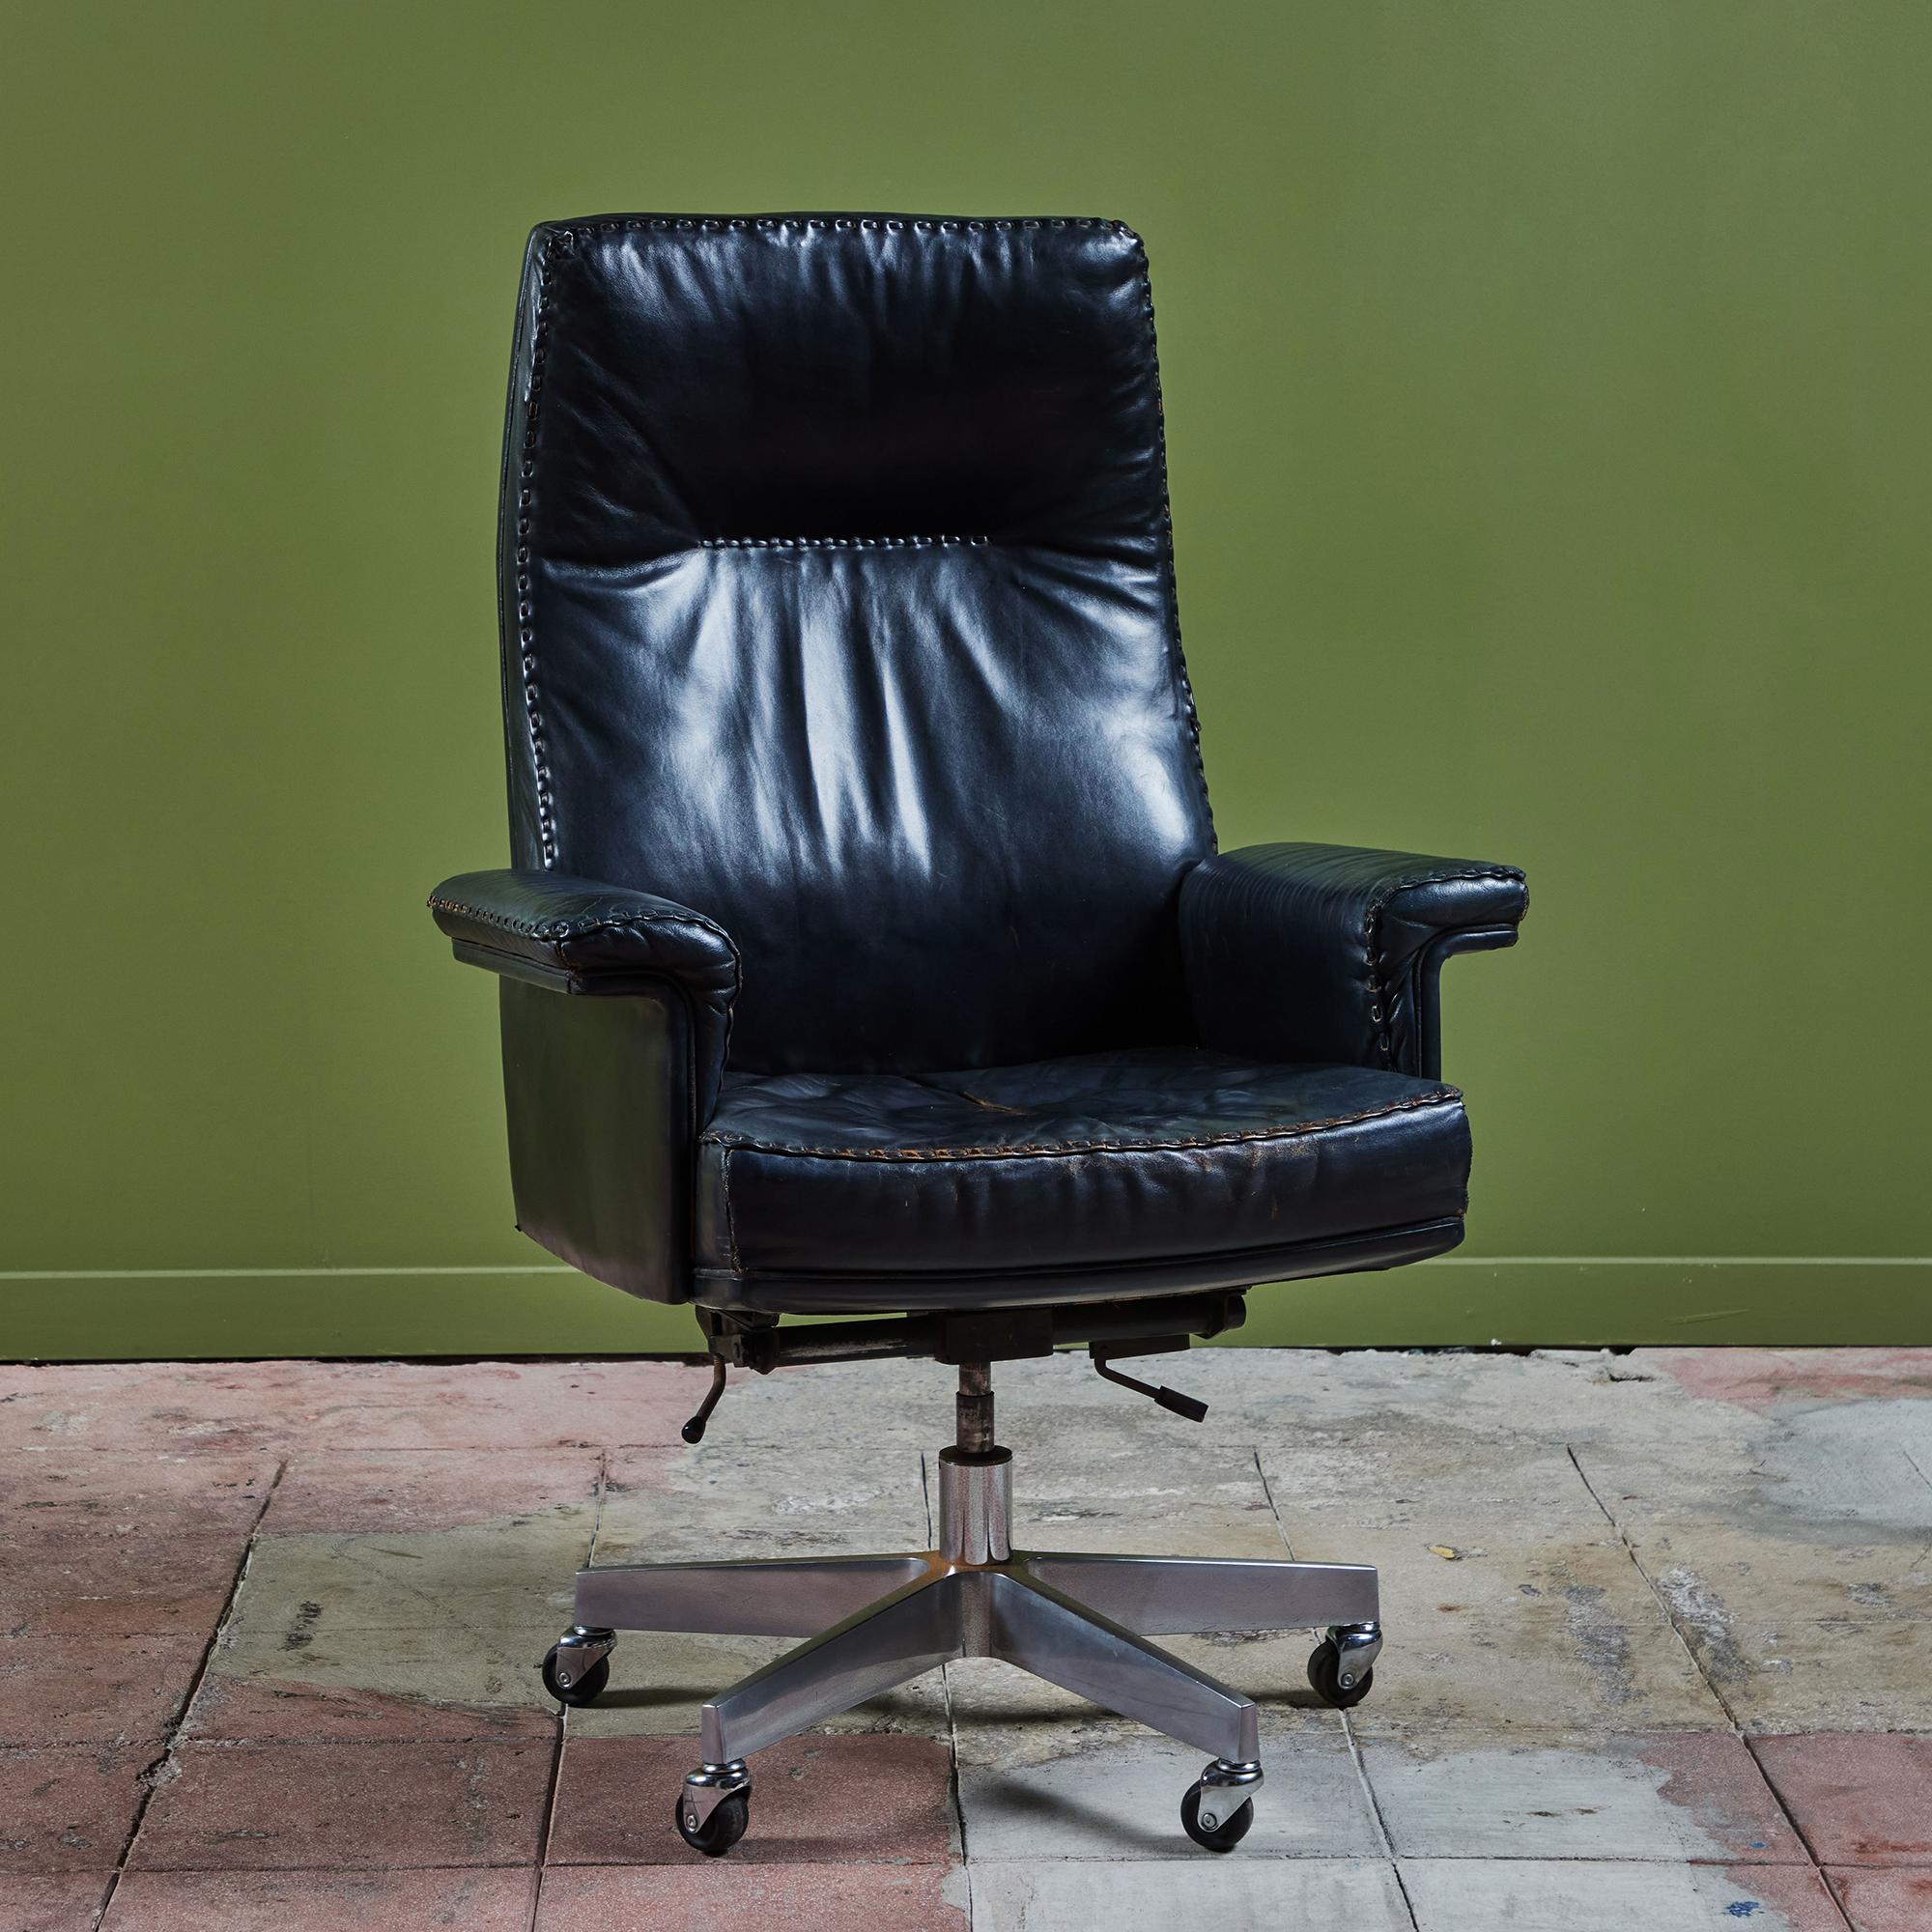 Executive desk chair by De Sede c.1970s. This Swiss made chair features the original black leather upholstery with a beautiful hand stitched detailing along the edge. The chair is outfitted with a tilt swivel mechanism that allows the seat to be